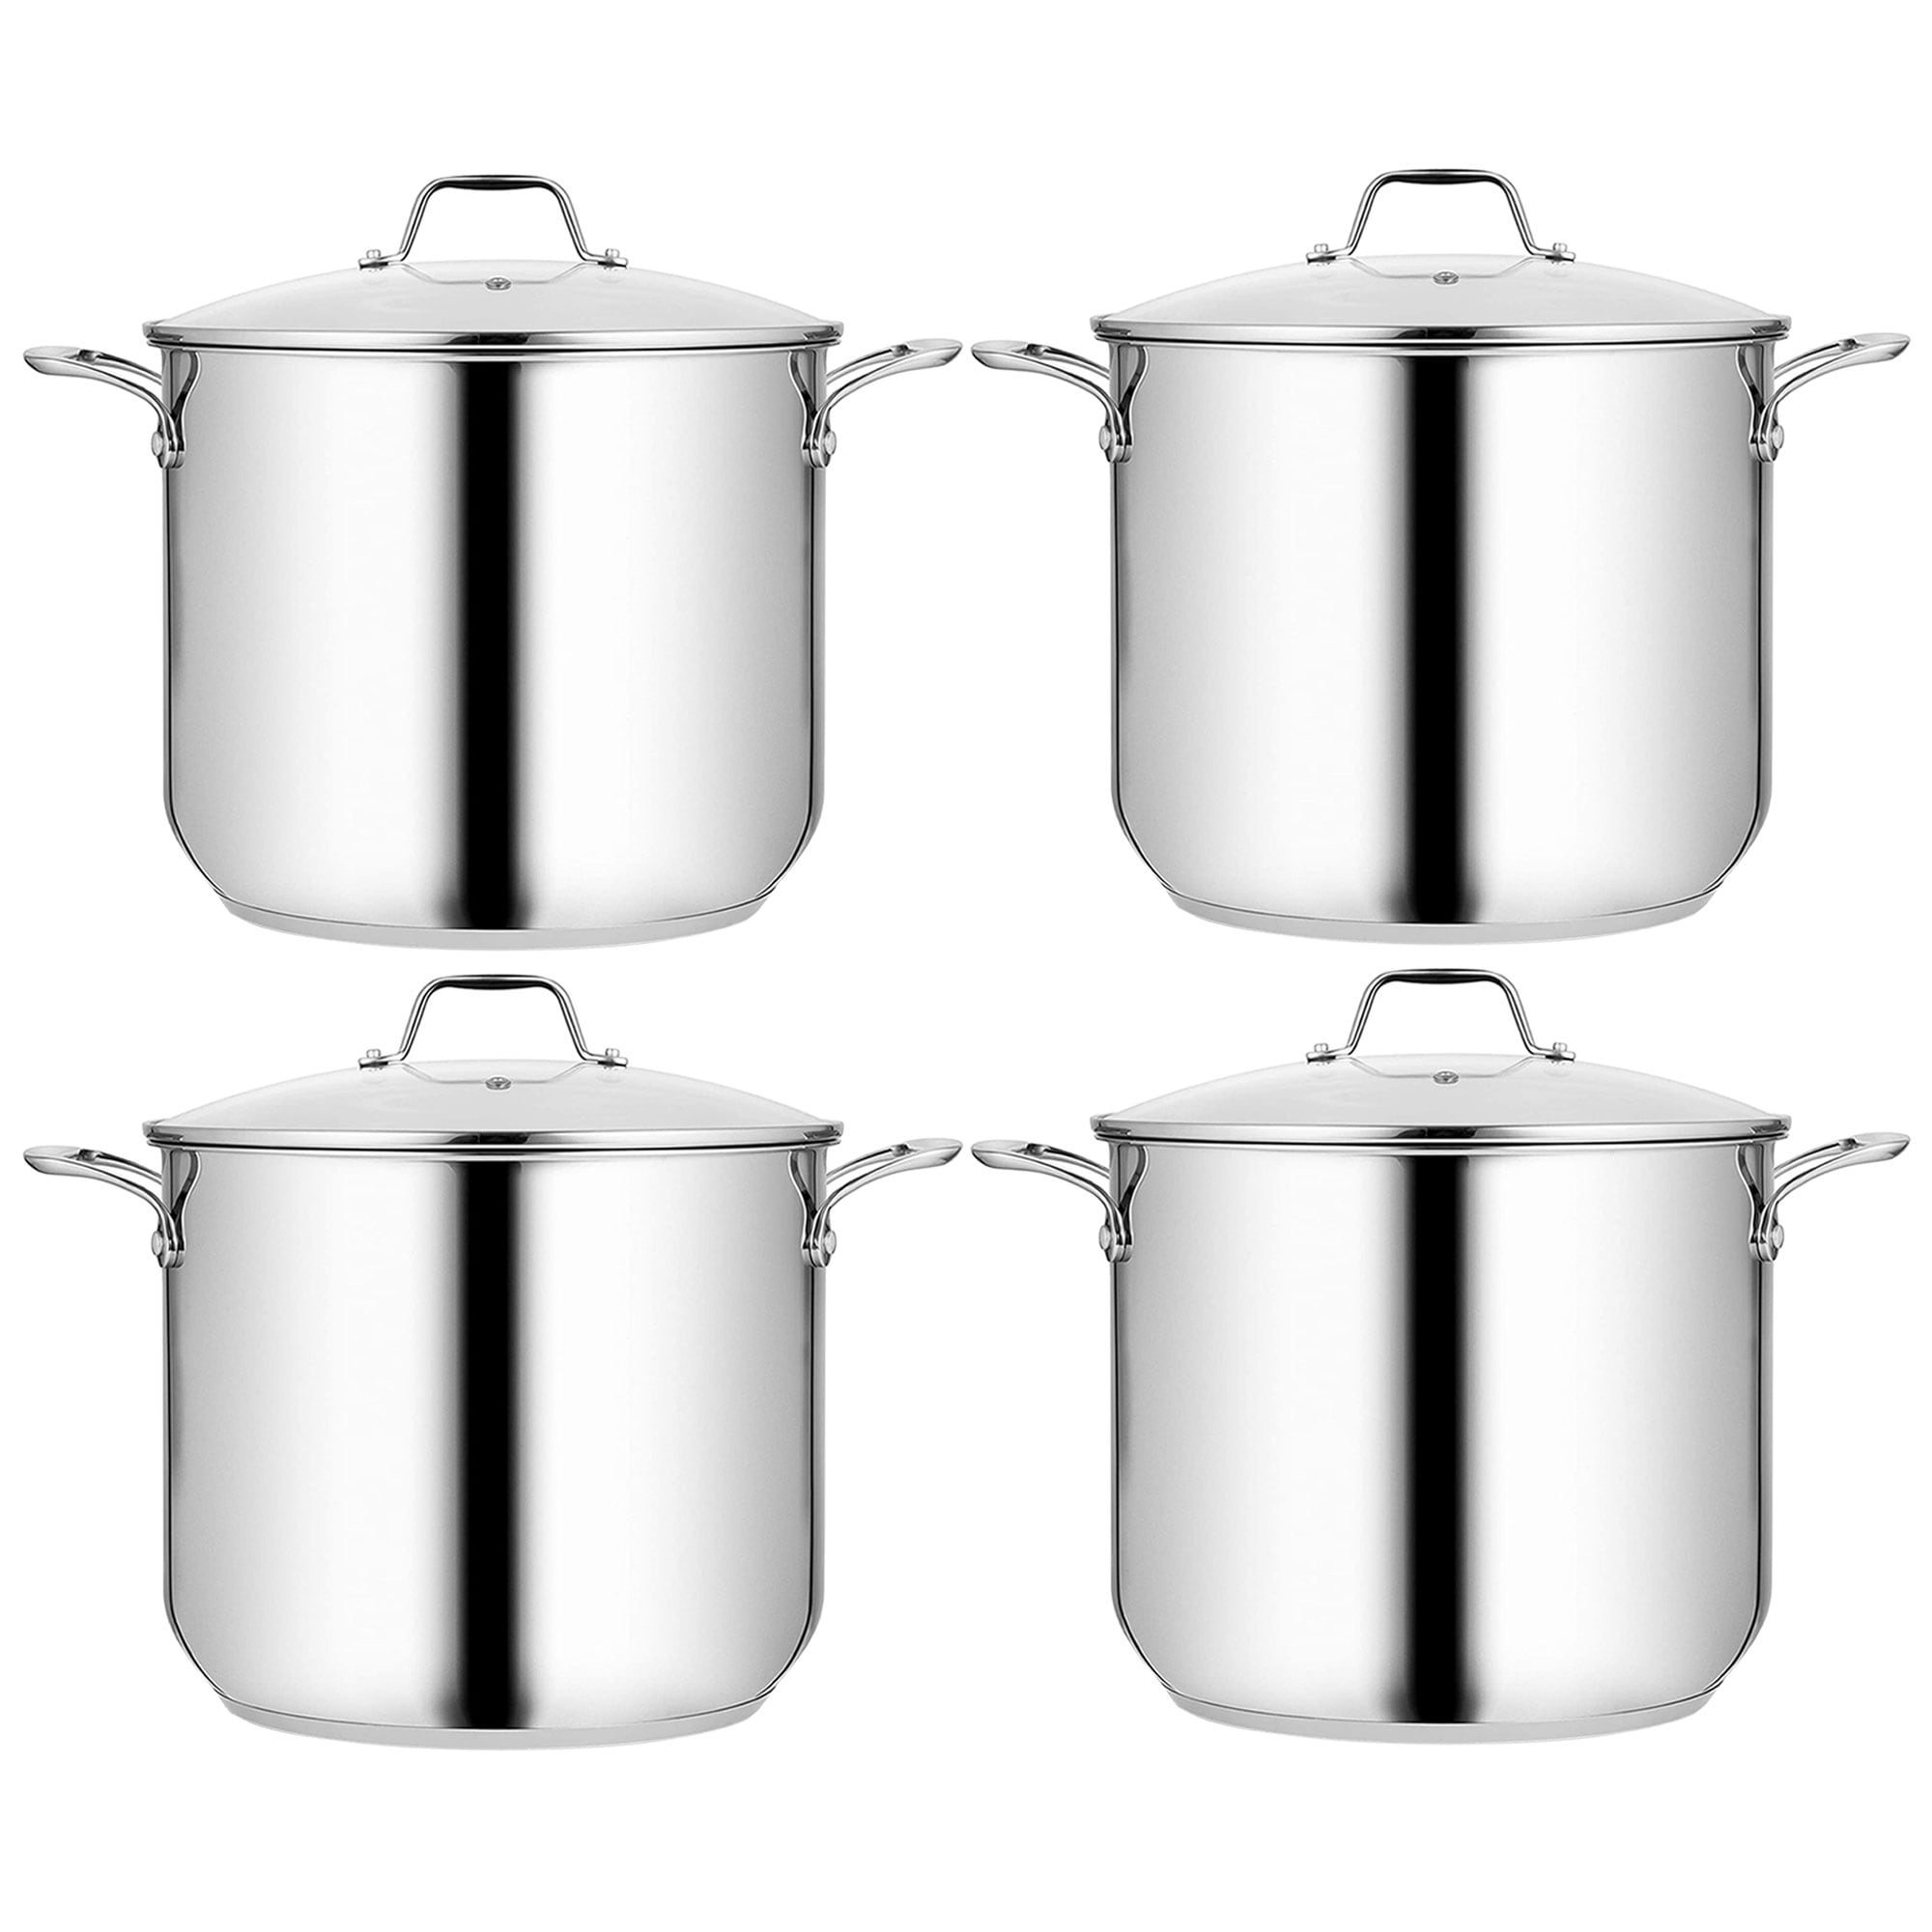 https://ak1.ostkcdn.com/images/products/is/images/direct/eafd808c722a0e2248a487196592a122ca87dc1d/NutriChef-Heavy-Duty-19-Quart-Stainless-Steel-Soup-Stock-Pot-with-Lid-%284-Pack%29.jpg